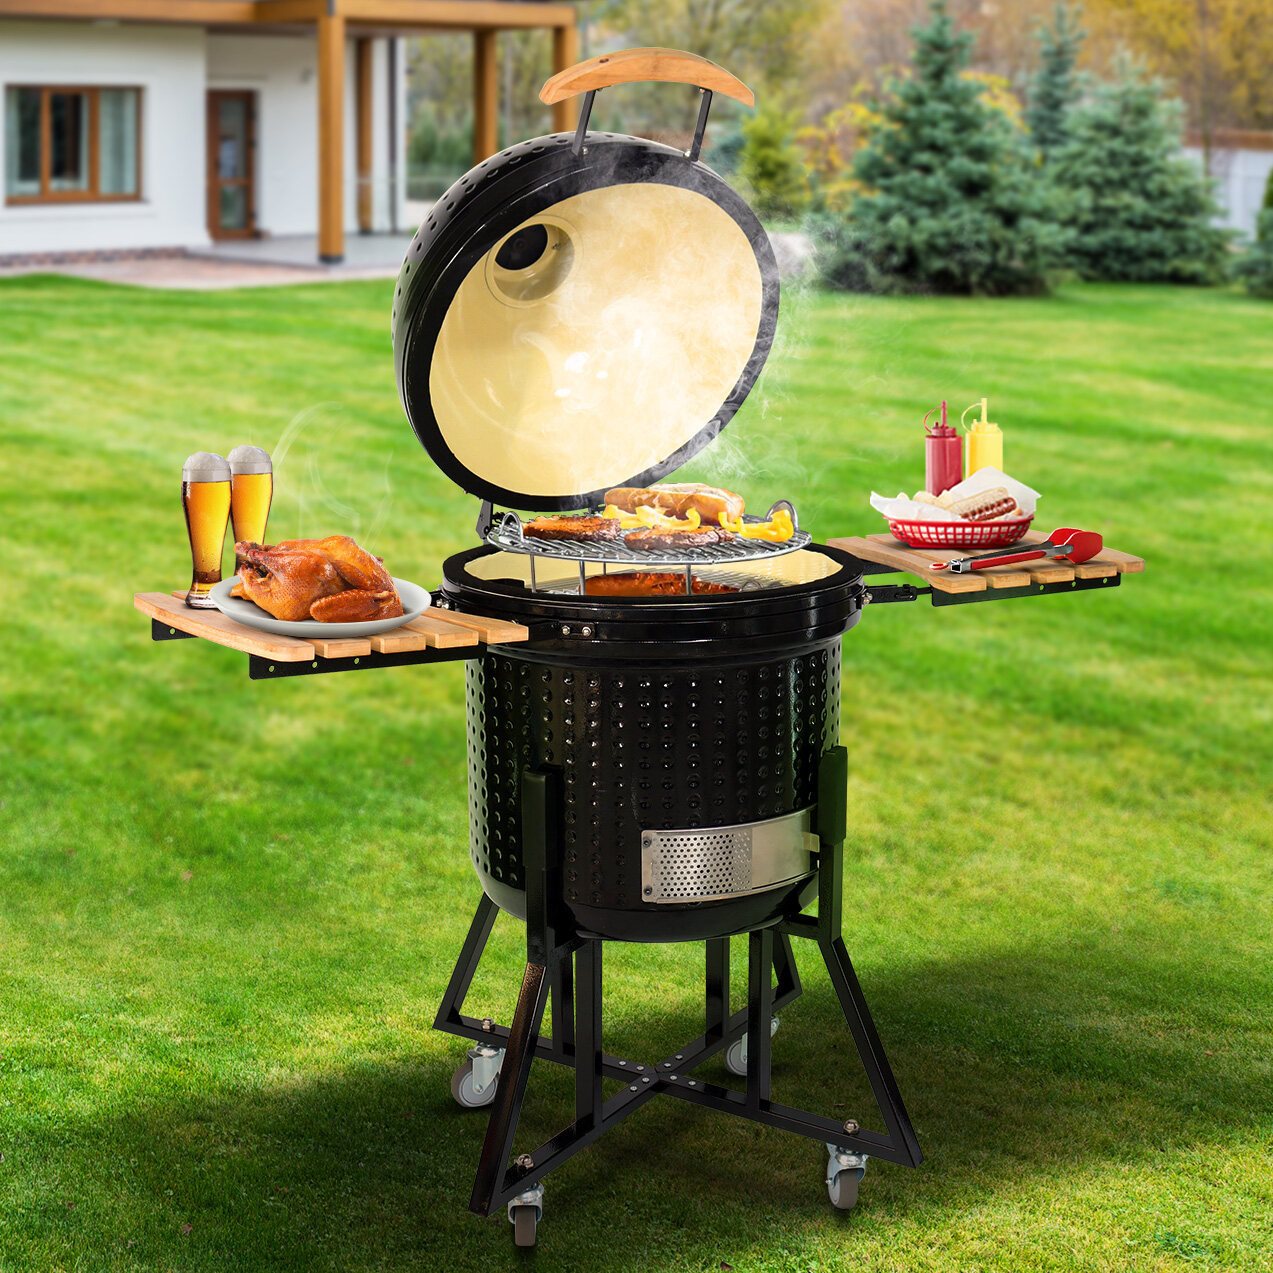 Vertical Drum Barbecue Grills factory